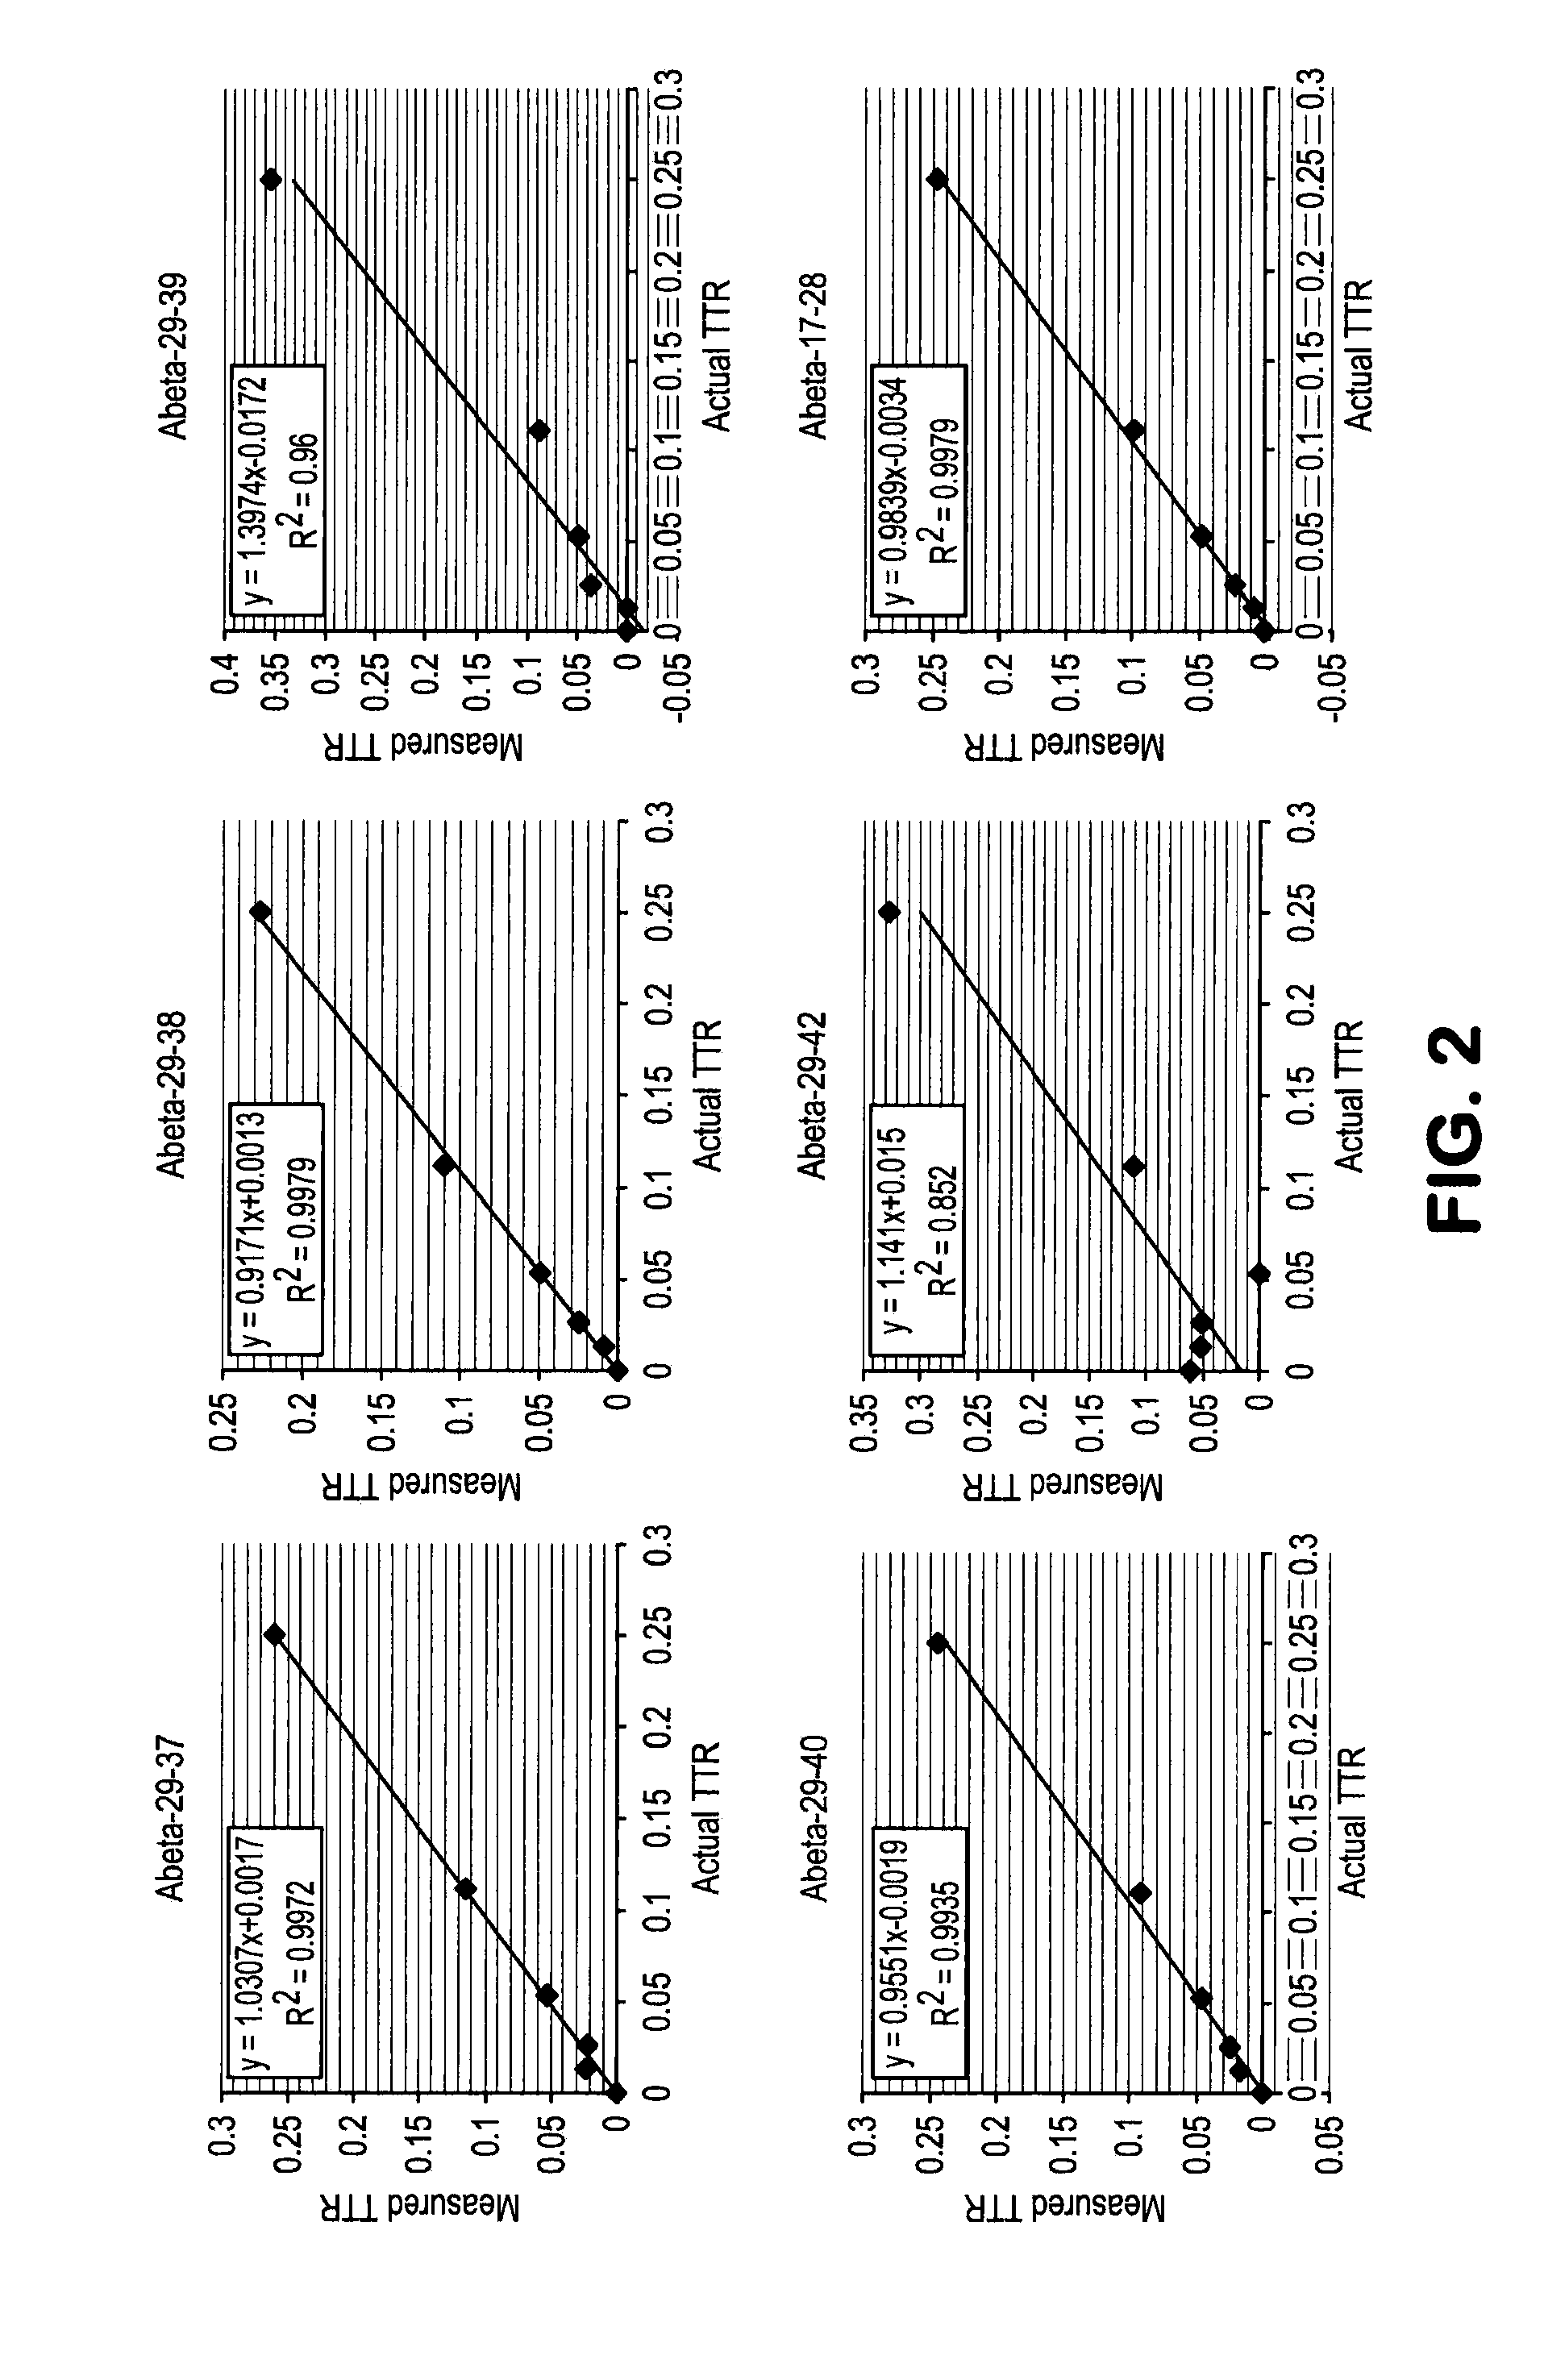 Methods for measuring concentrations of biomolecules